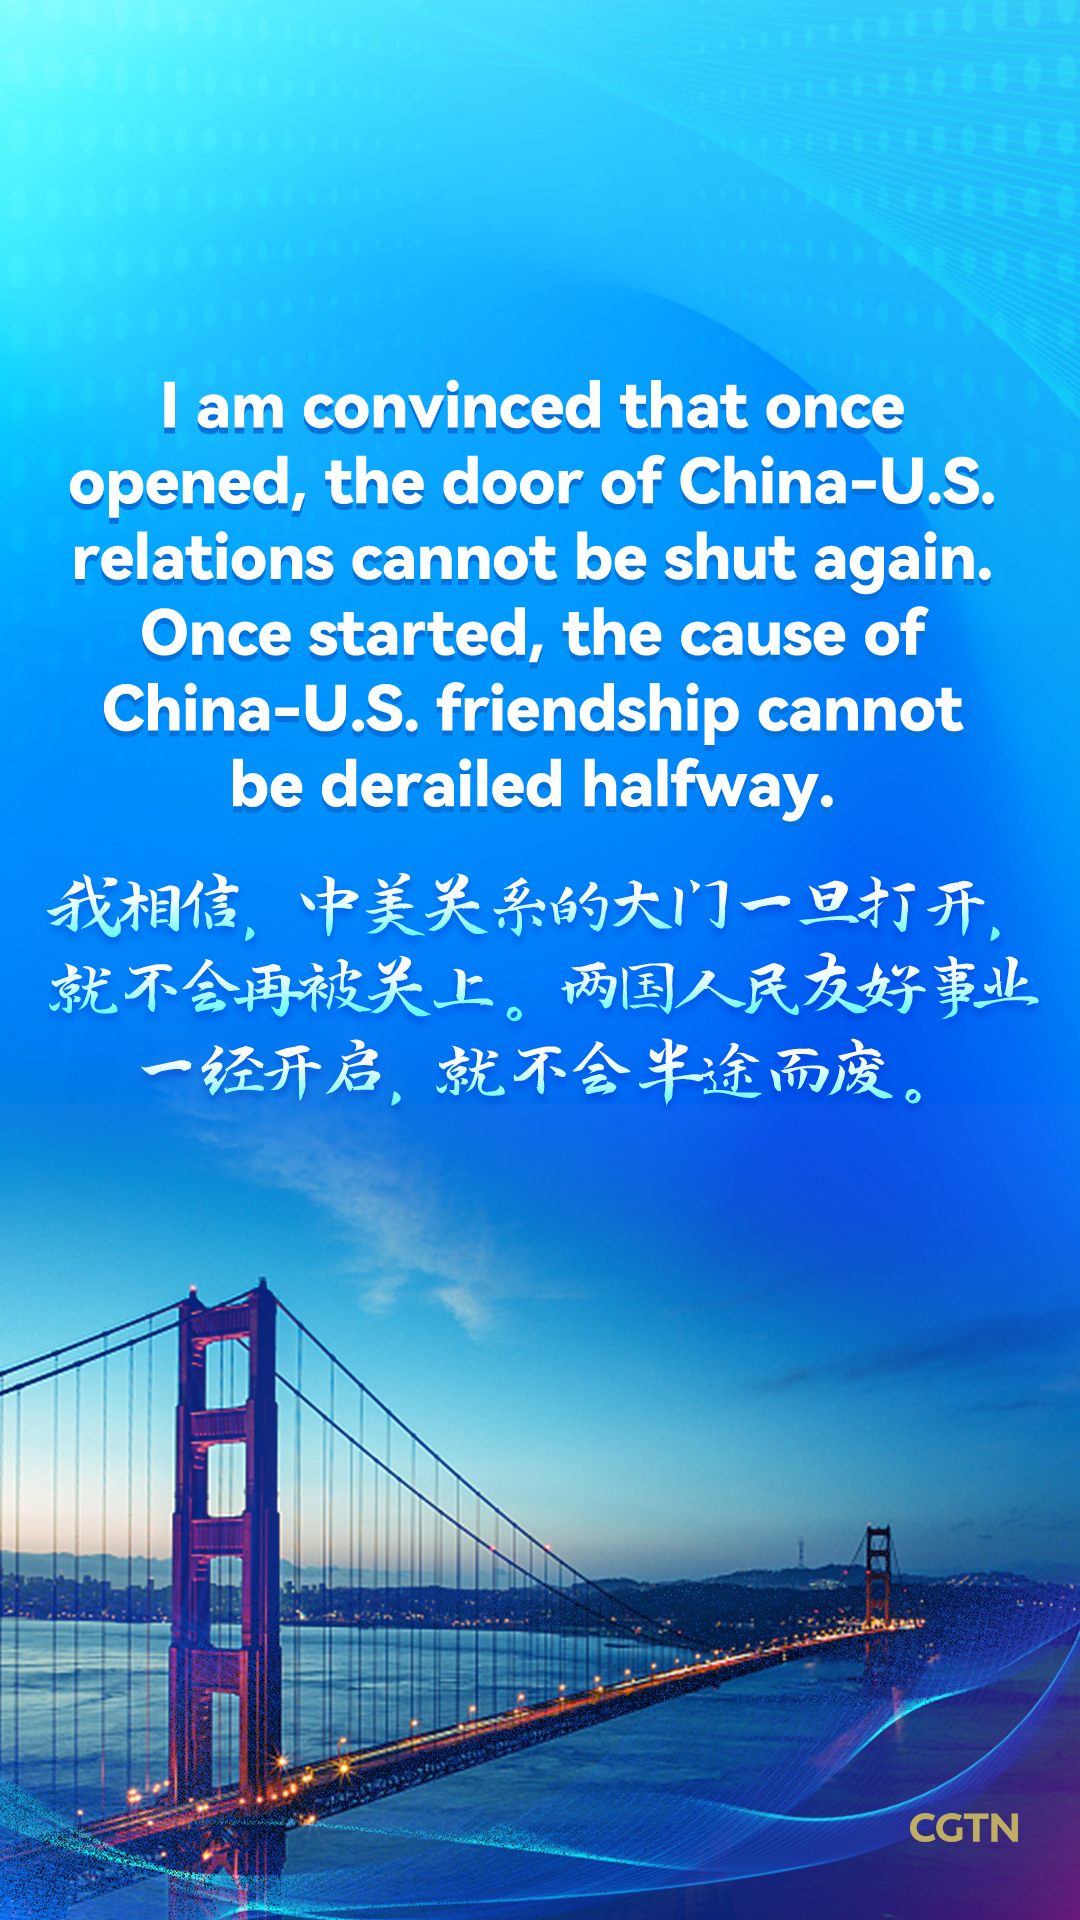 Xi Jinping's key quotes at the welcome dinner in U.S.